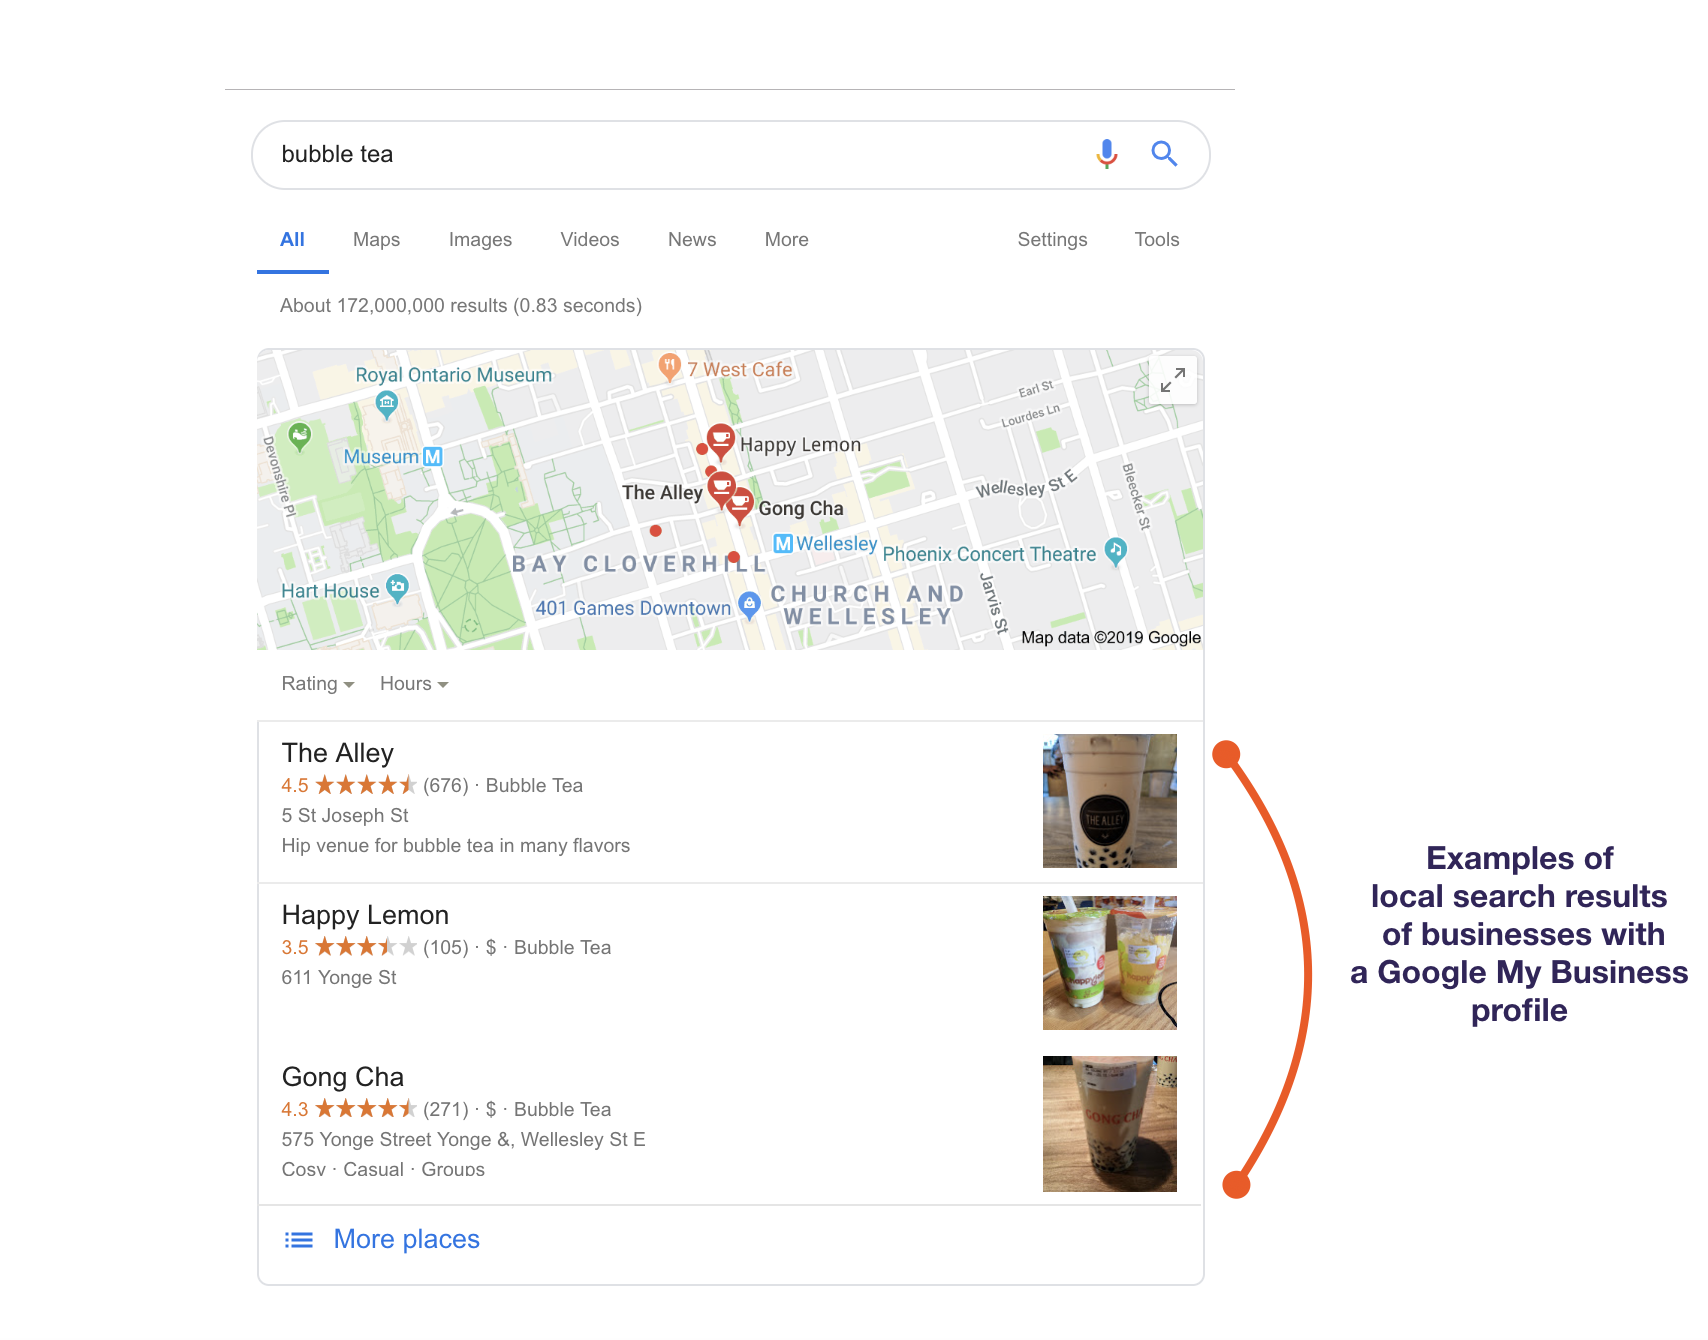 Example of how Google My Business profiles appear in search results